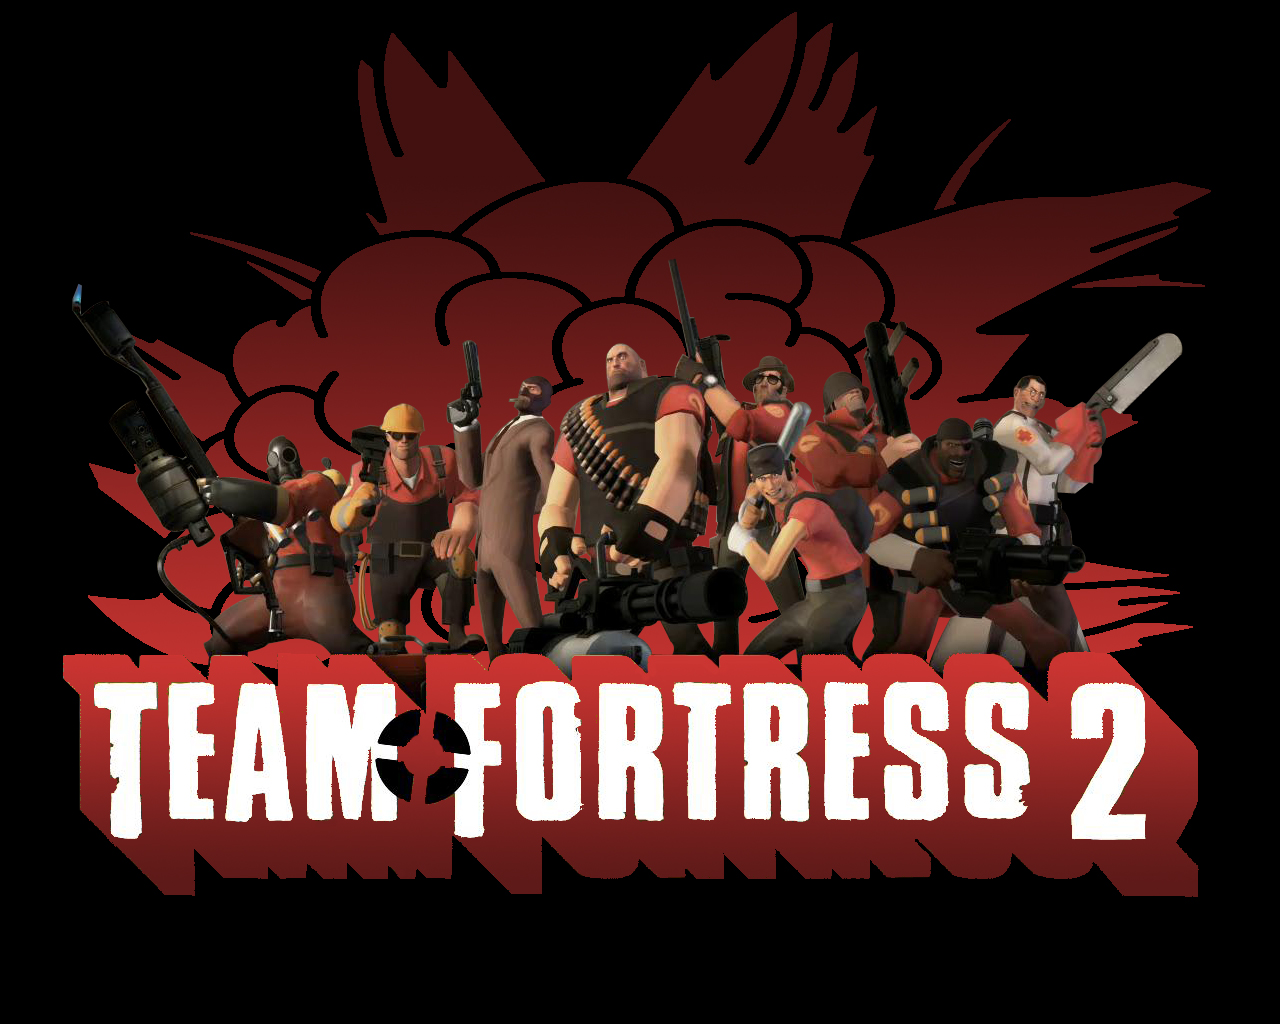 Team fortress 2 background